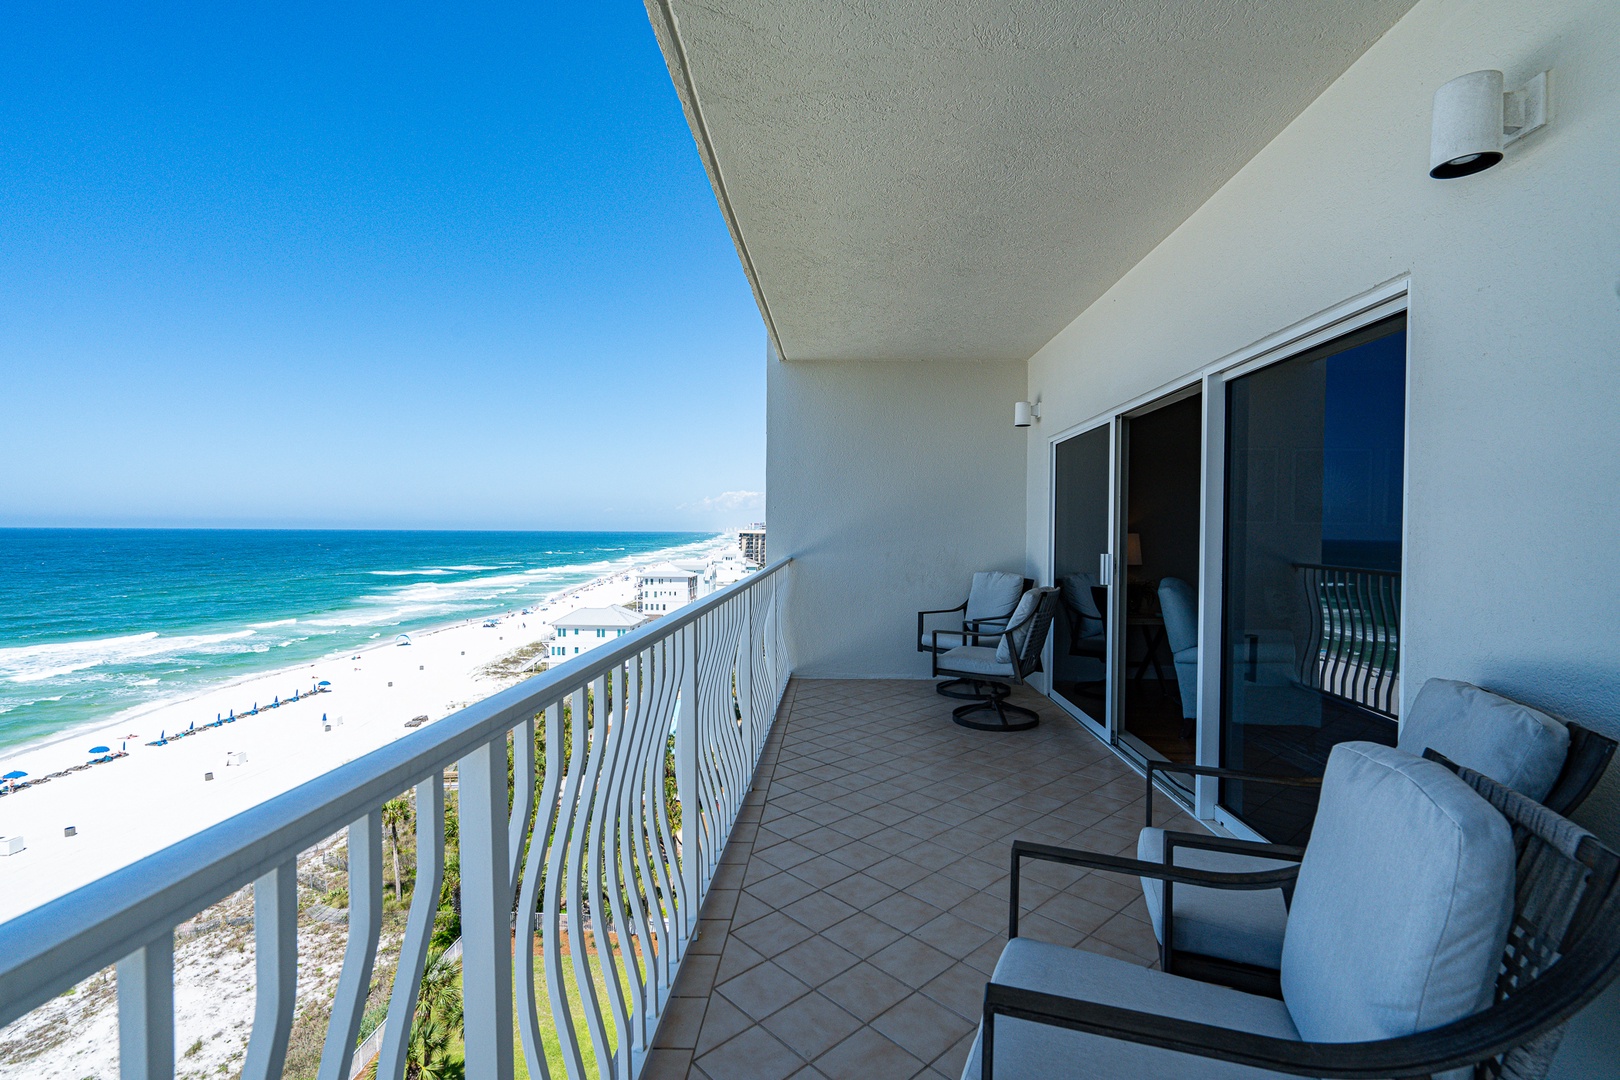 Step out onto the breezy balcony & take in the stunning ocean views